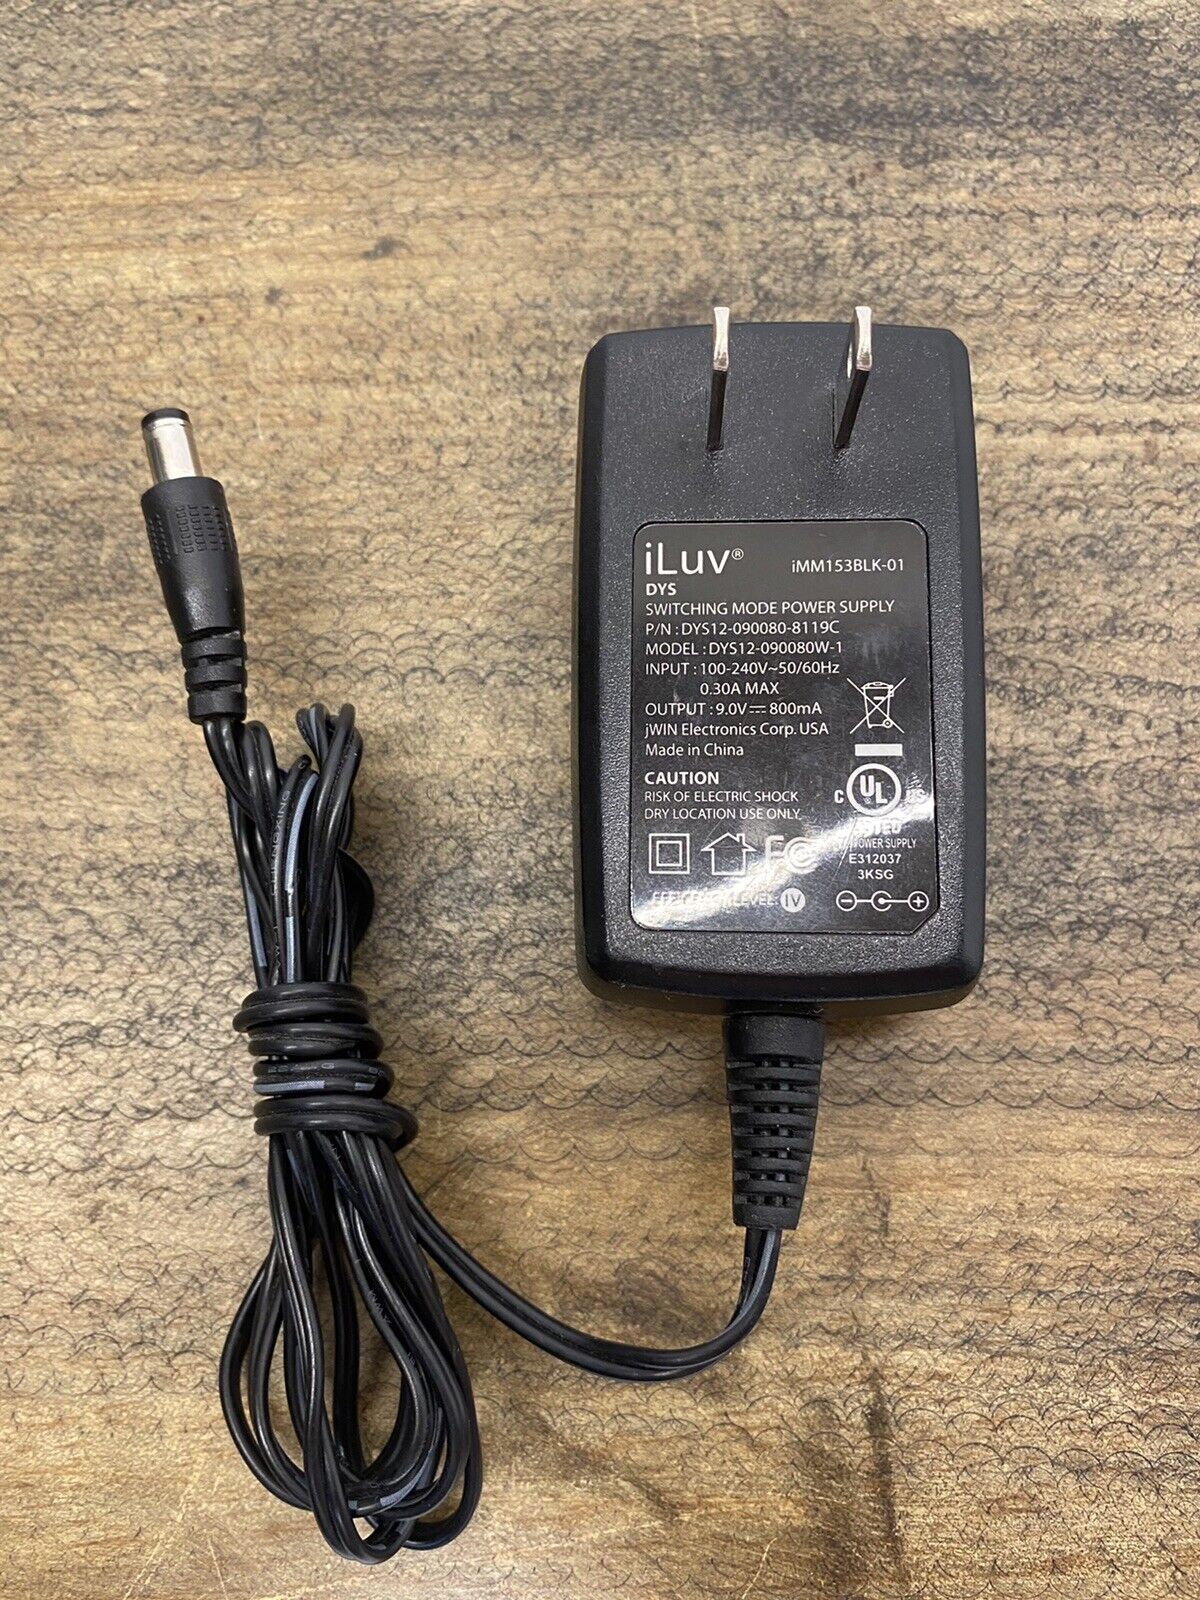 BSY Switching Adapter Model BSYB0501500U 5V 1.5A Brand BSY Type Adapter Output Voltage 5 V BSY Switching Adapter Mo - Click Image to Close